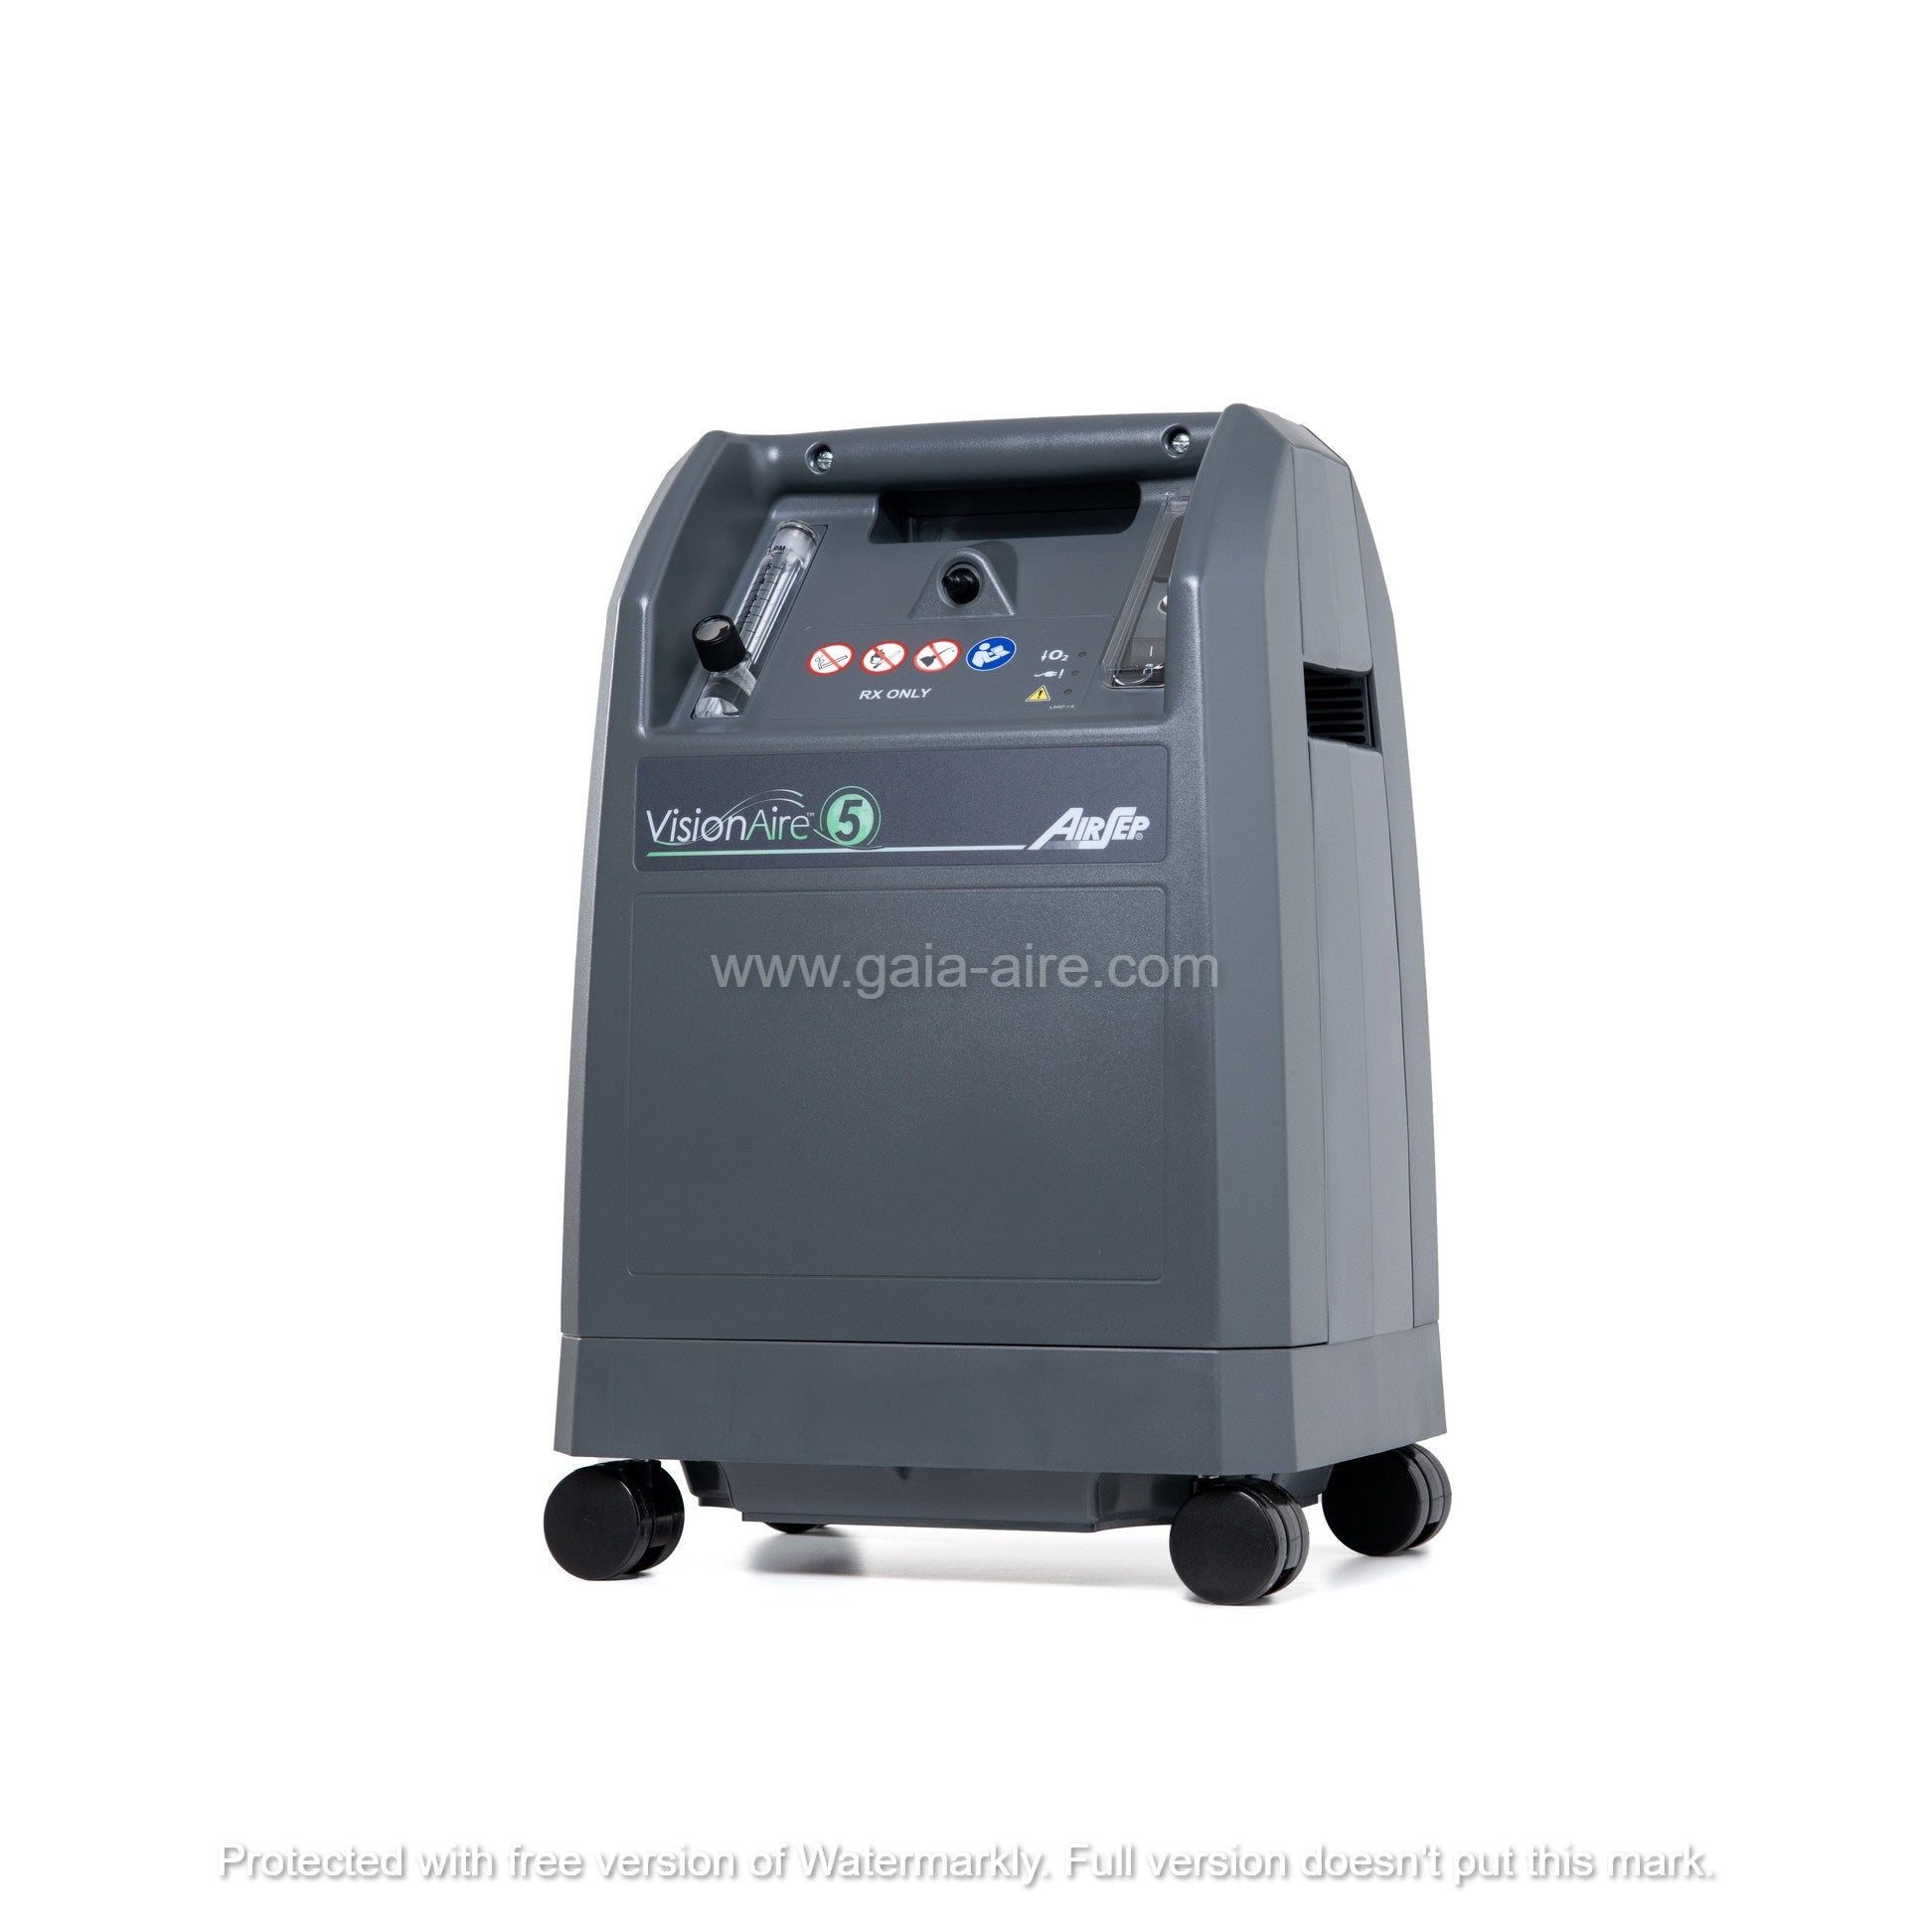 AS098-7 VisionAire 5 Mini Oxygen Concentrator